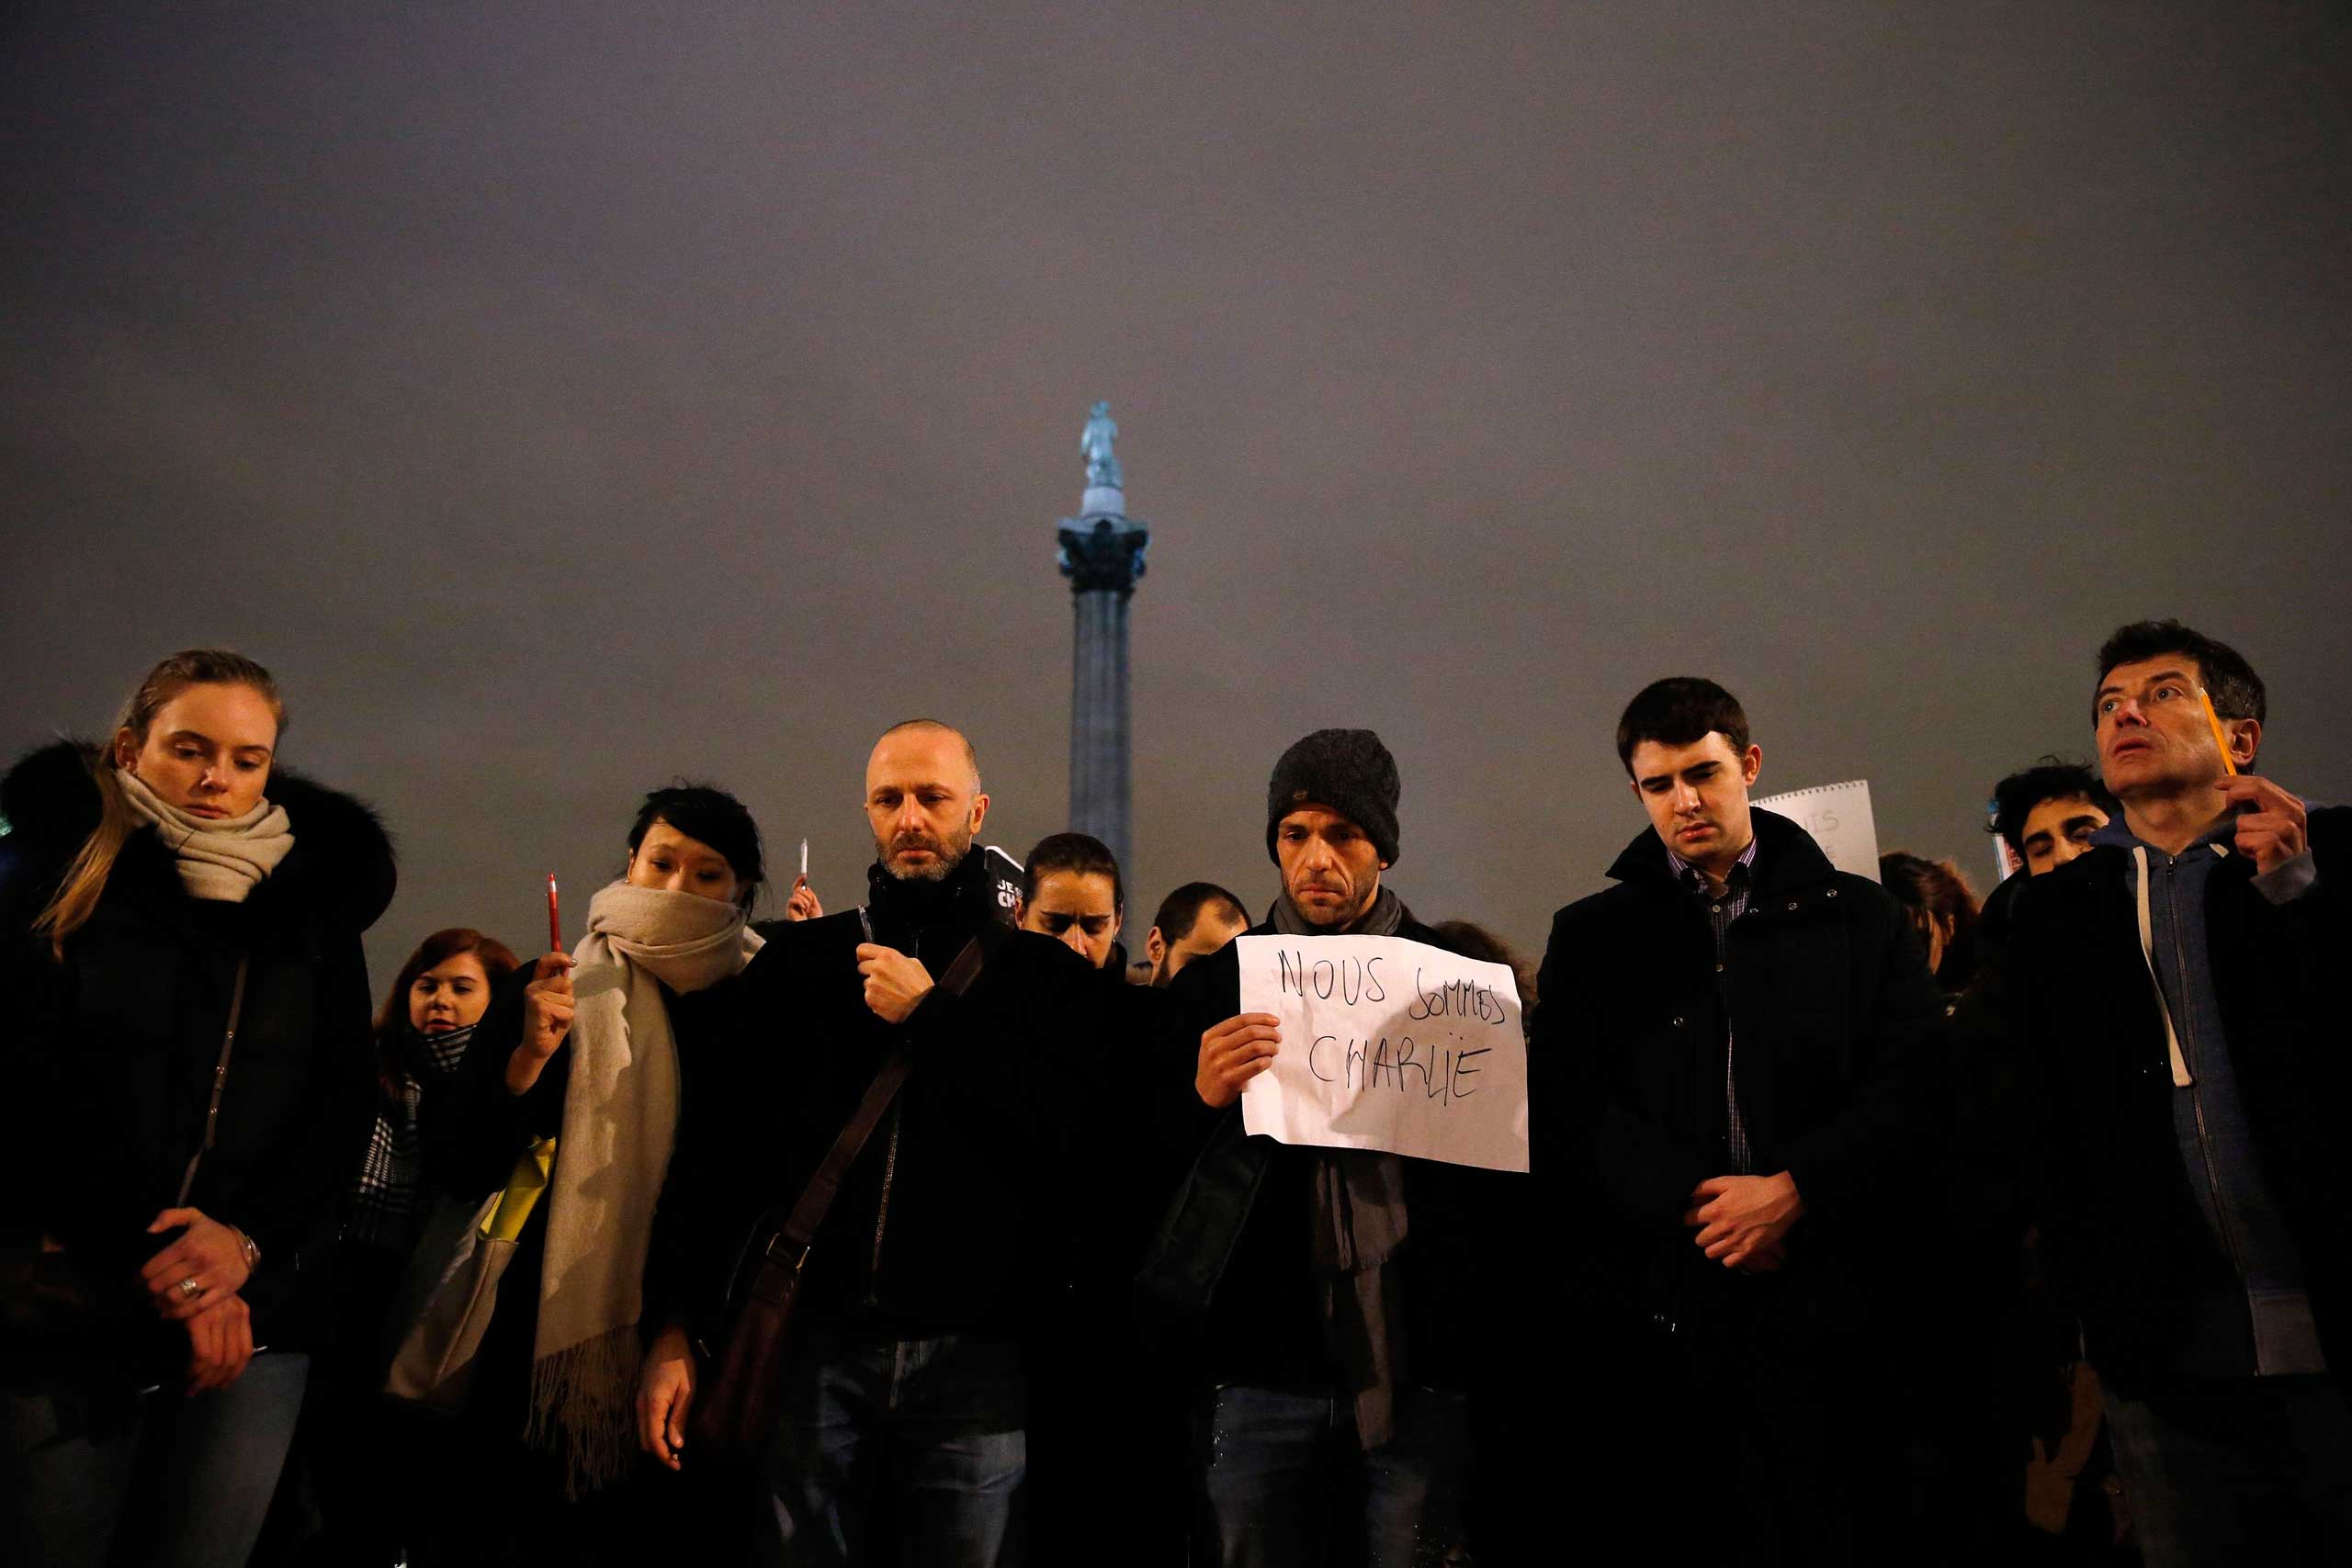 People raise pens and signs during a vigil to pay tribute to the victims of a shooting by gunmen at the Paris headquarters of the satirical weekly <i>Charlie Hebdo</i> at Trafalgar Square in London on Jan. 7, 2015 (Suzanne Plunkett—Reuters)